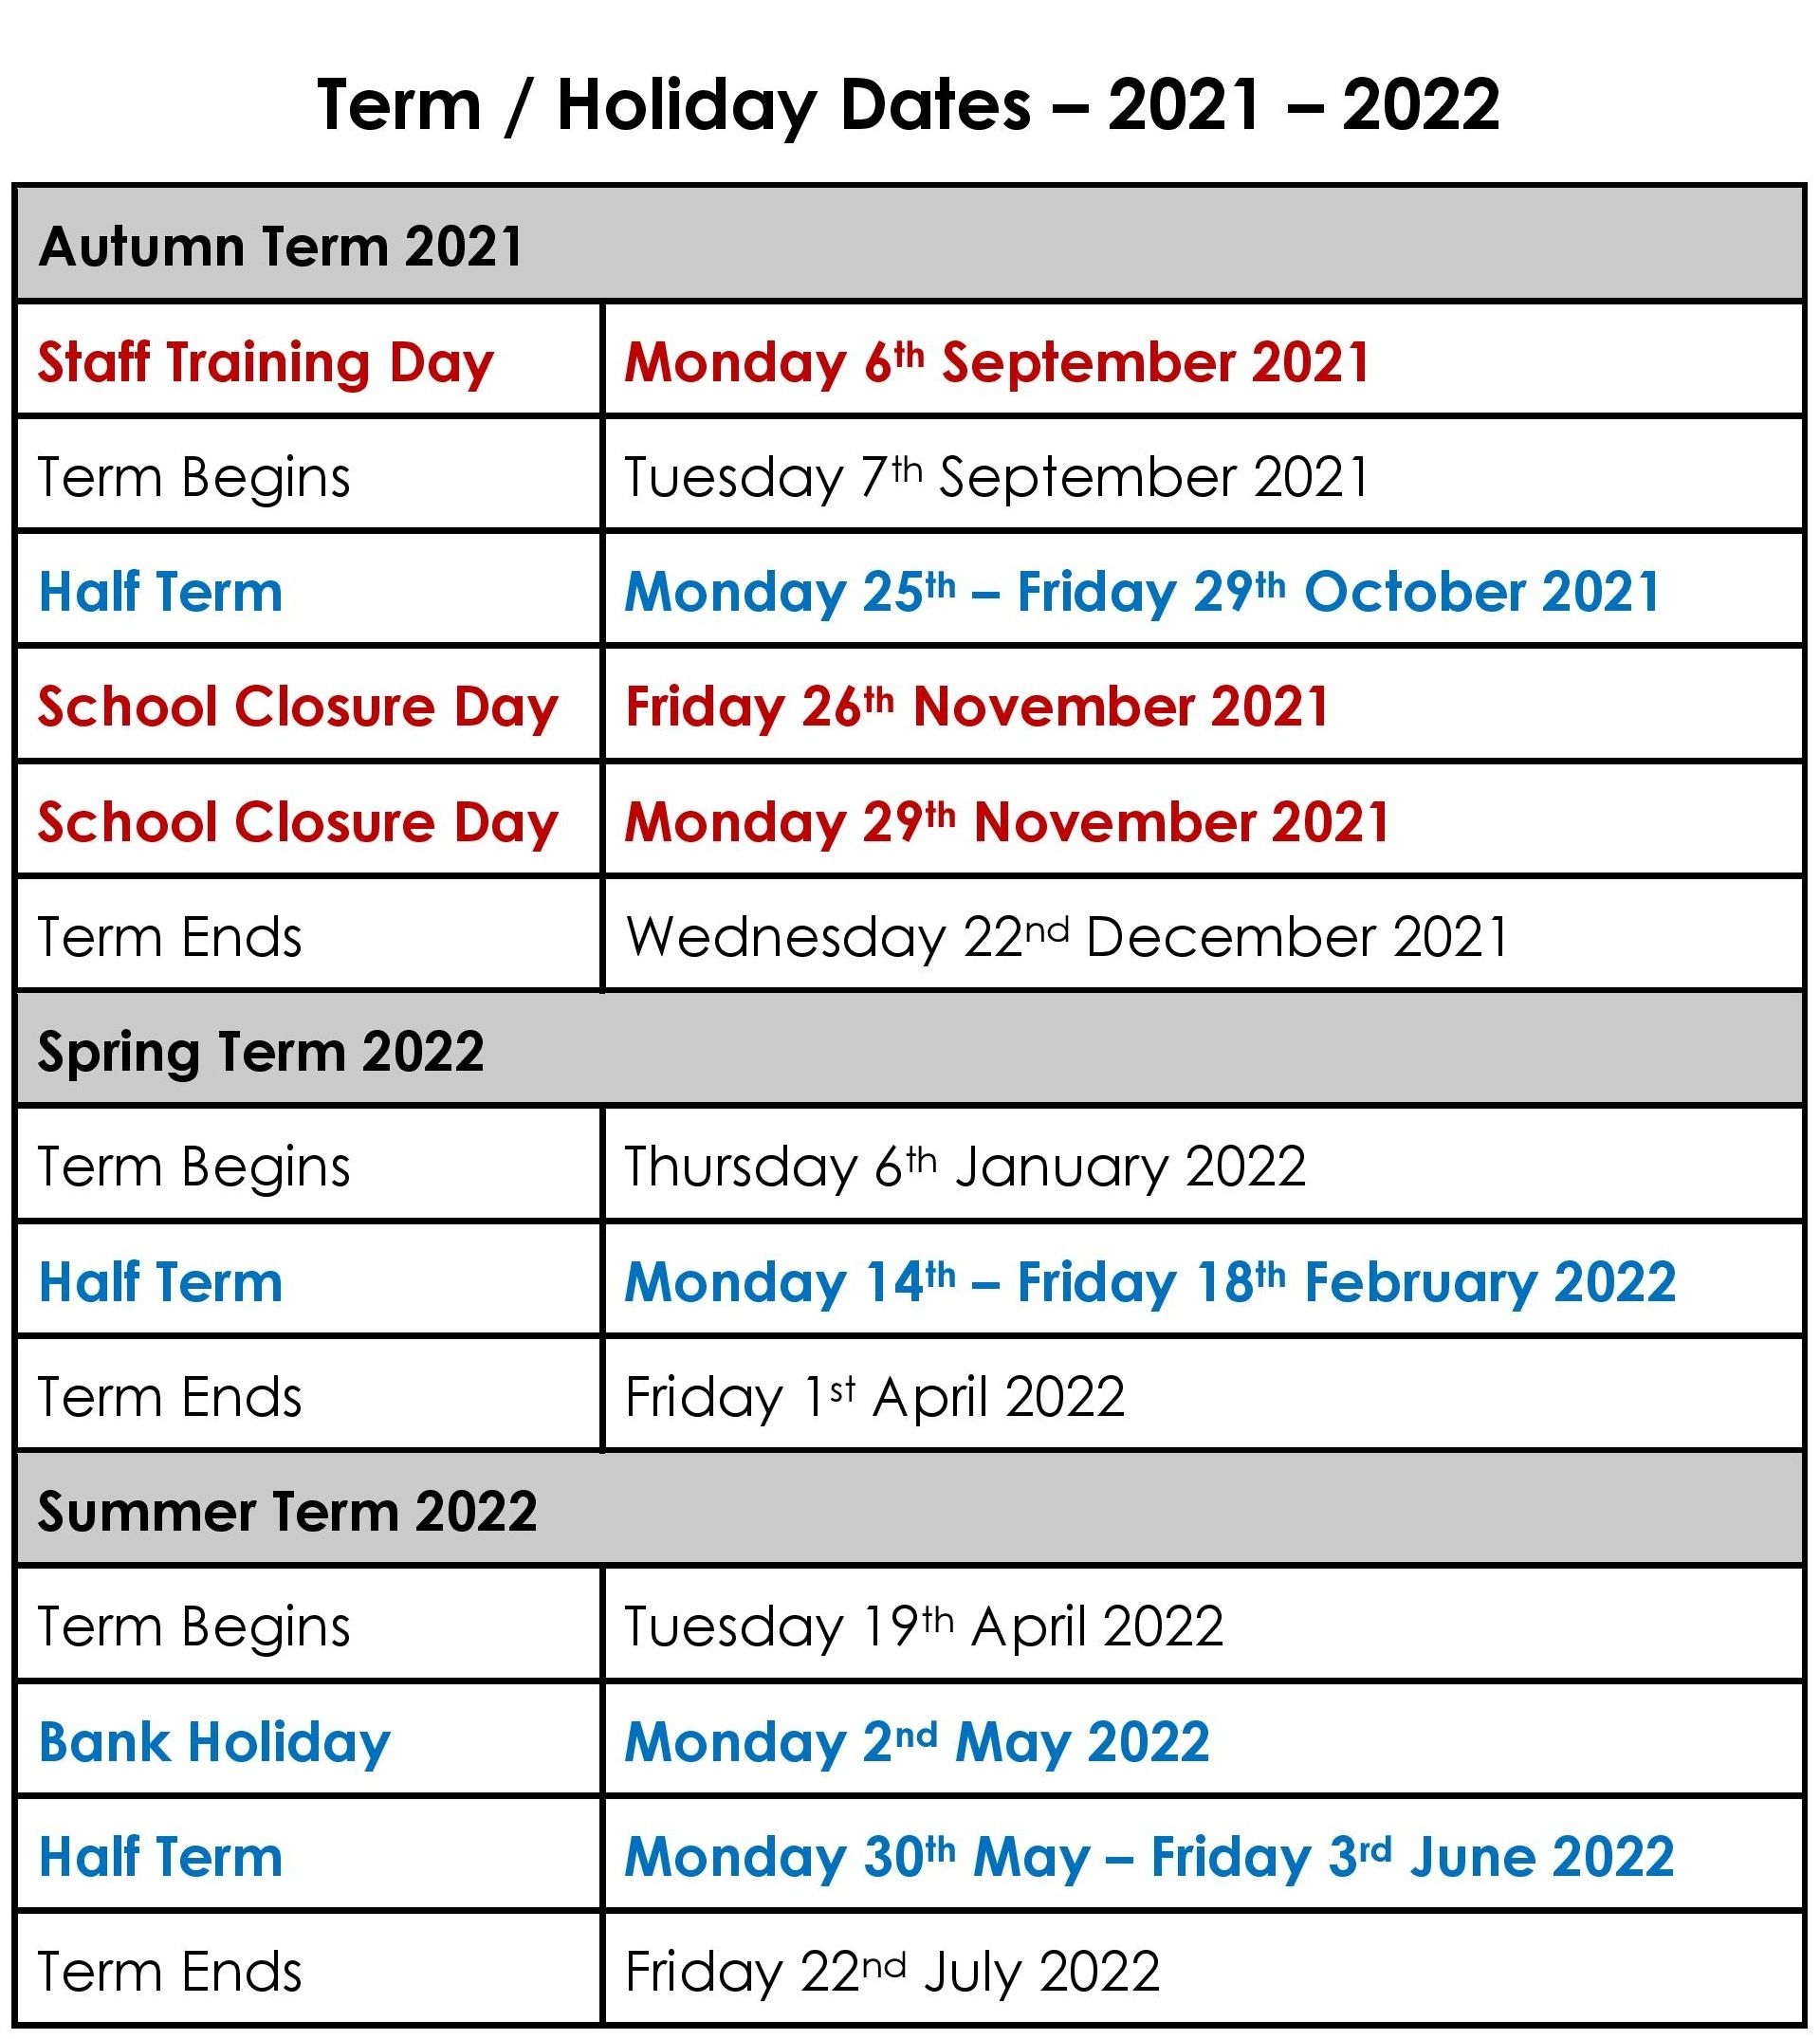 Term/Holiday Dates | Bsca